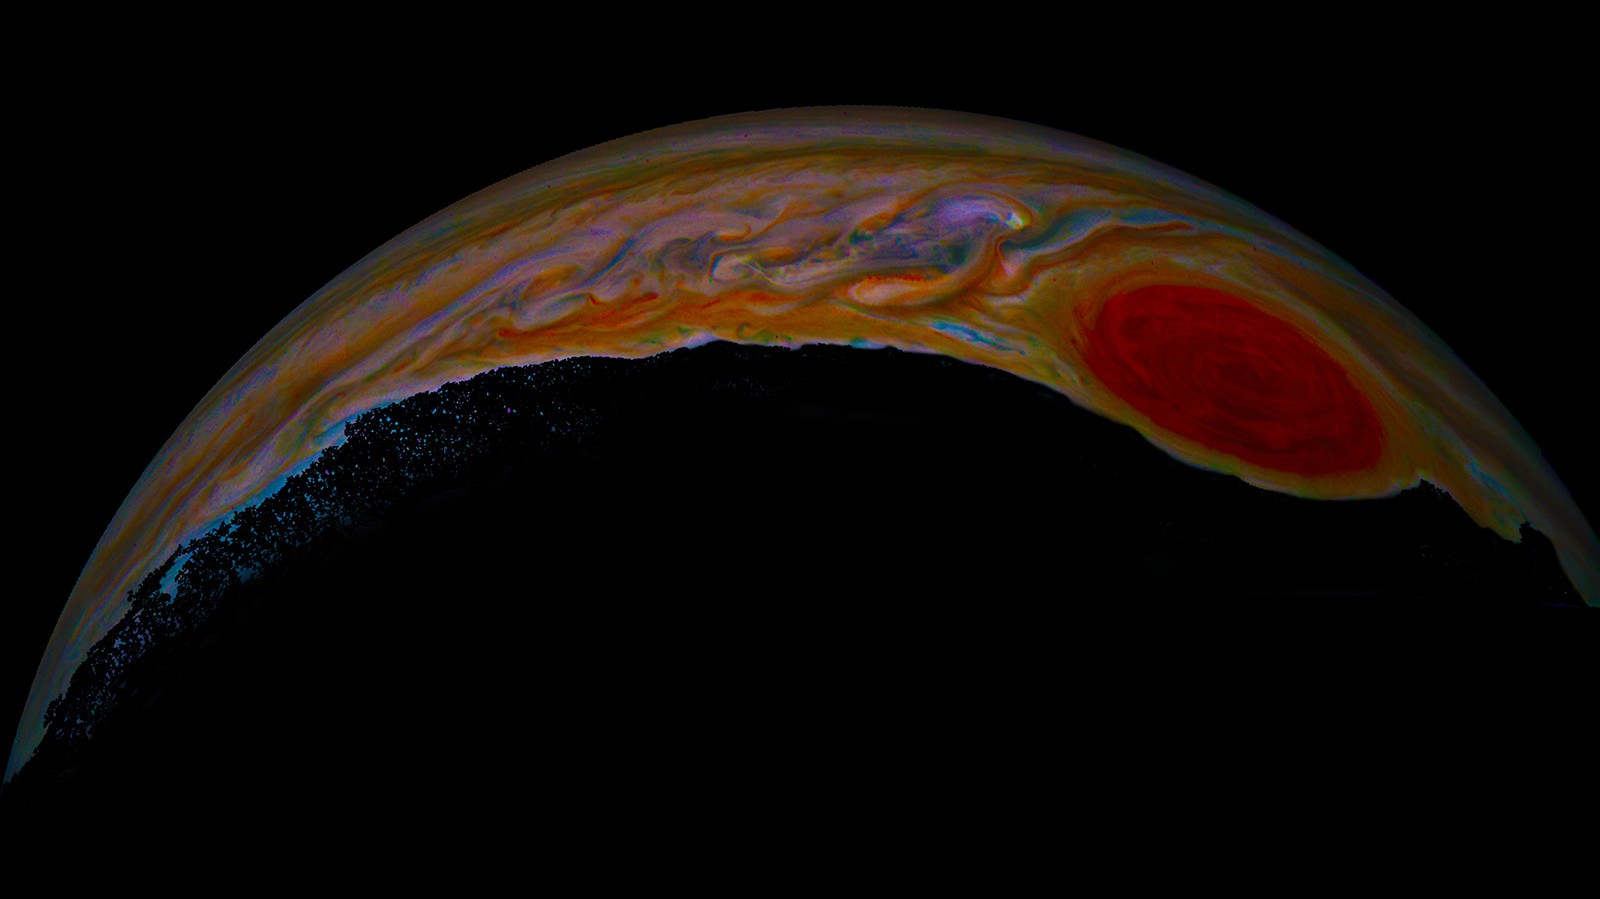 Jupiter’s already vibrant colors become especially striking in this artistic interpretation of an image from NASA’s Juno mission that shows the planet’s famous Great Red Spot. Image processed by Mary J. Murphy courtesy of NASA/JPL-Caltech/SwRI/MSSS